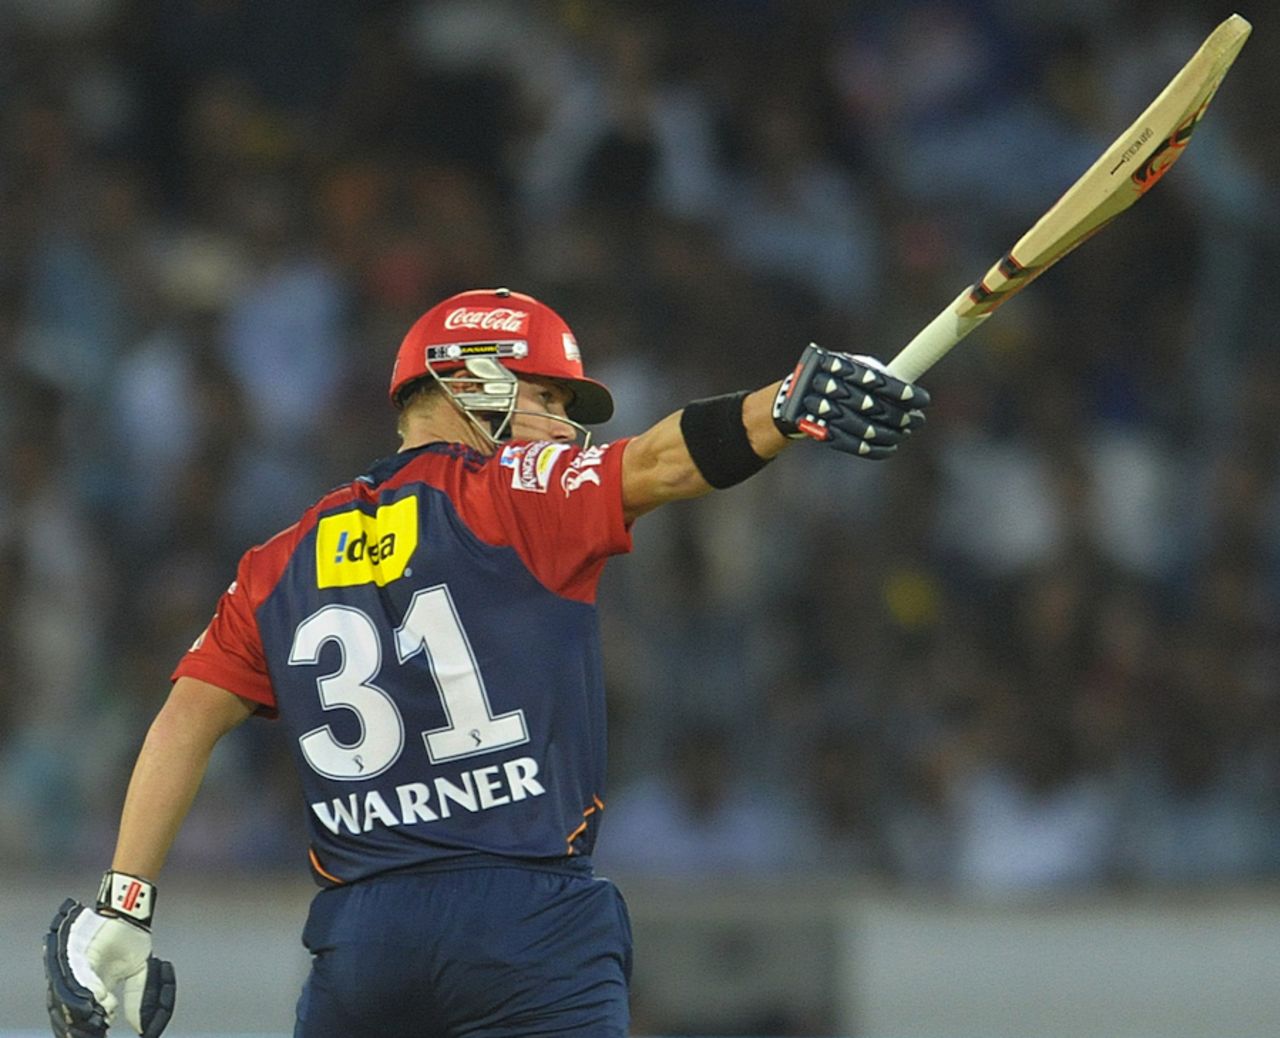 David Warner slammed a quick half-century in his second outing this year, Deccan Chargers v Delhi Daredevils, IPL 2012, Hyderabad